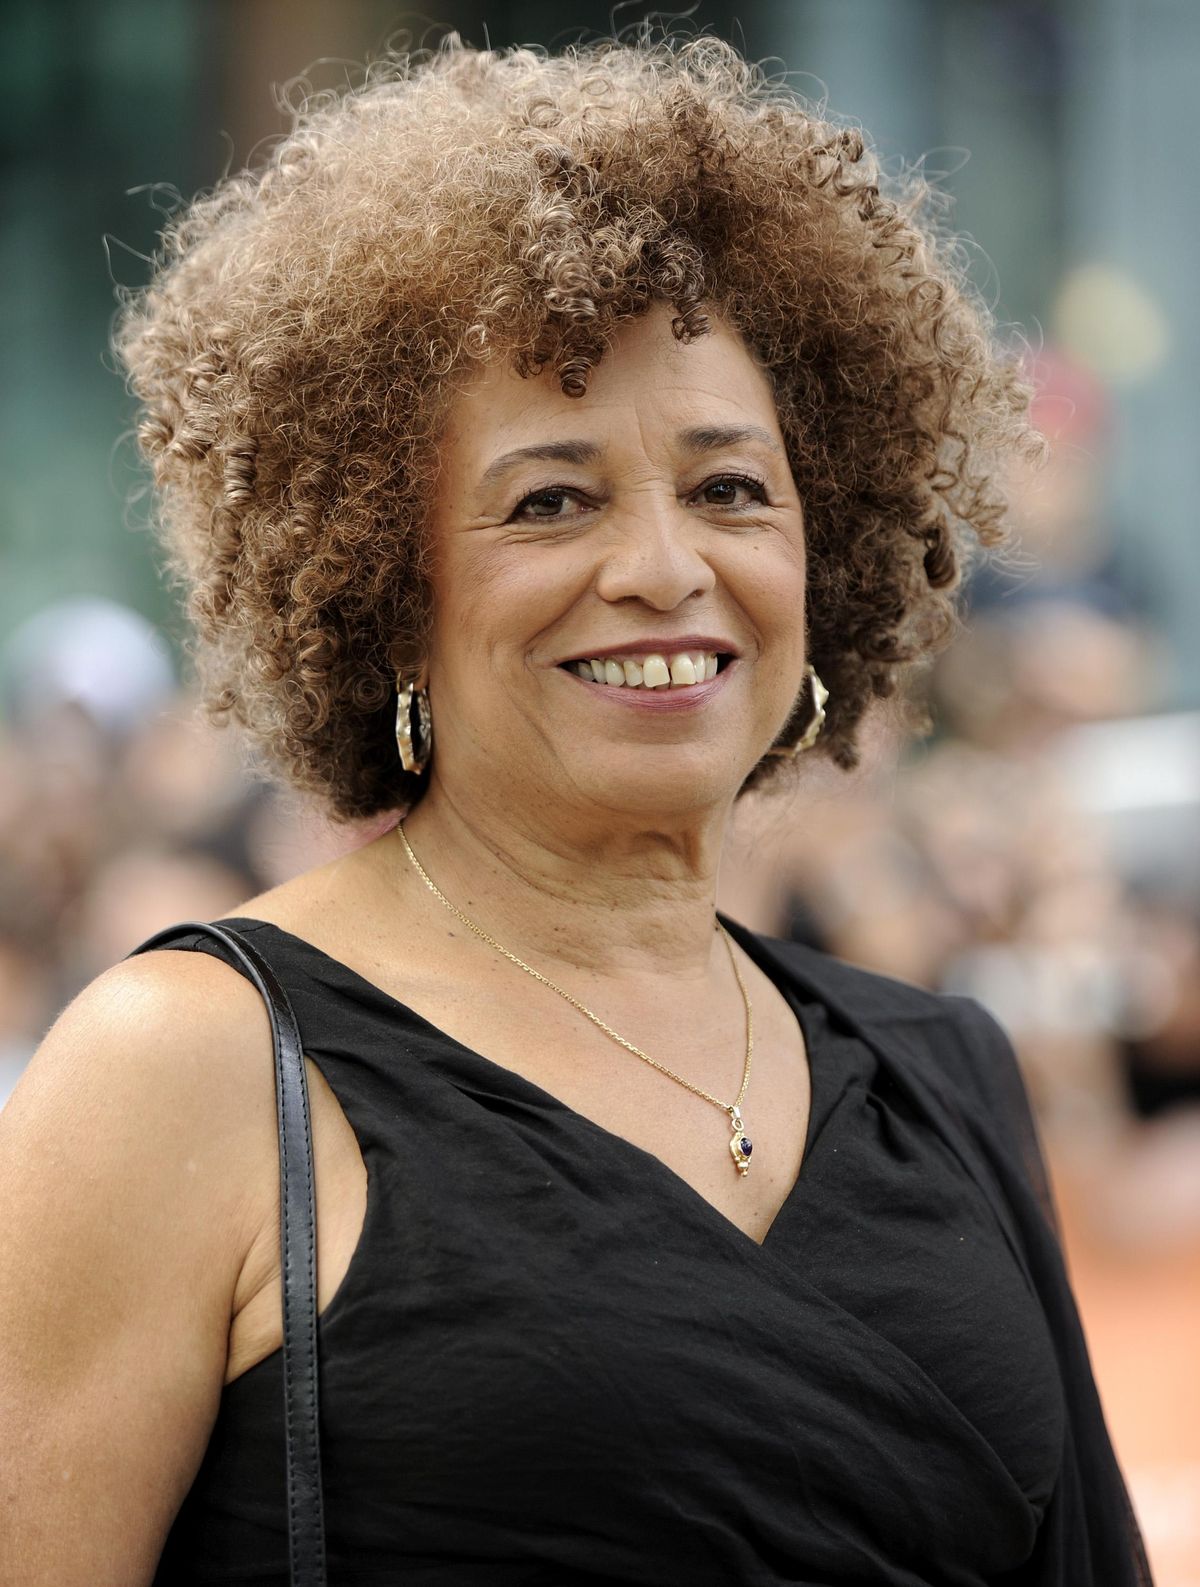 Activist Angela Davis attends the premiere of "Free Angela and All Political Prisoners" during the Toronto International Film Festival on Sunday Sept. 9, 2012 in Toronto. (Evan Agostini / INVISION/AP)